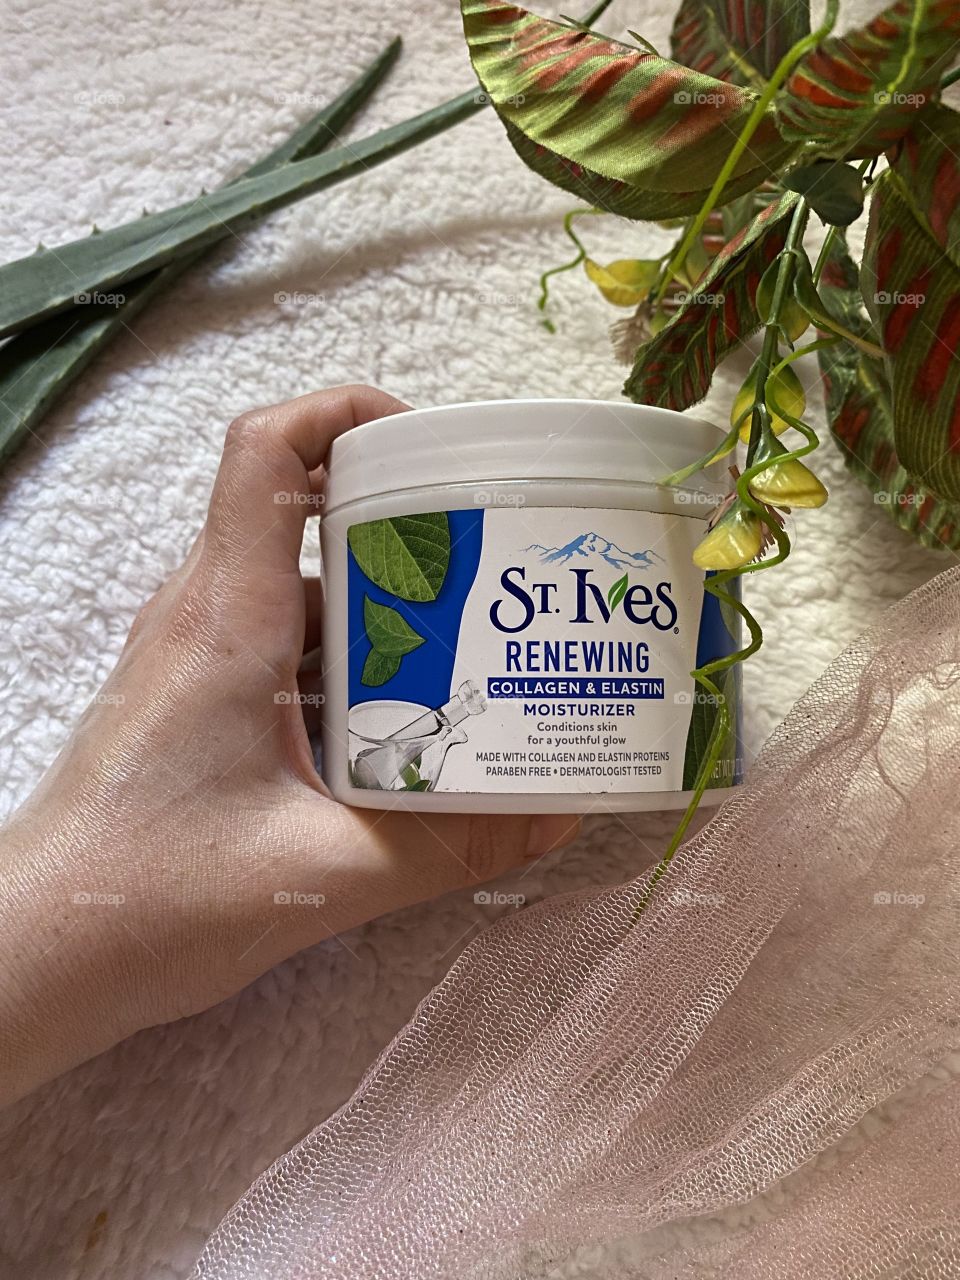 Skin care and full treatment with ST.Ives